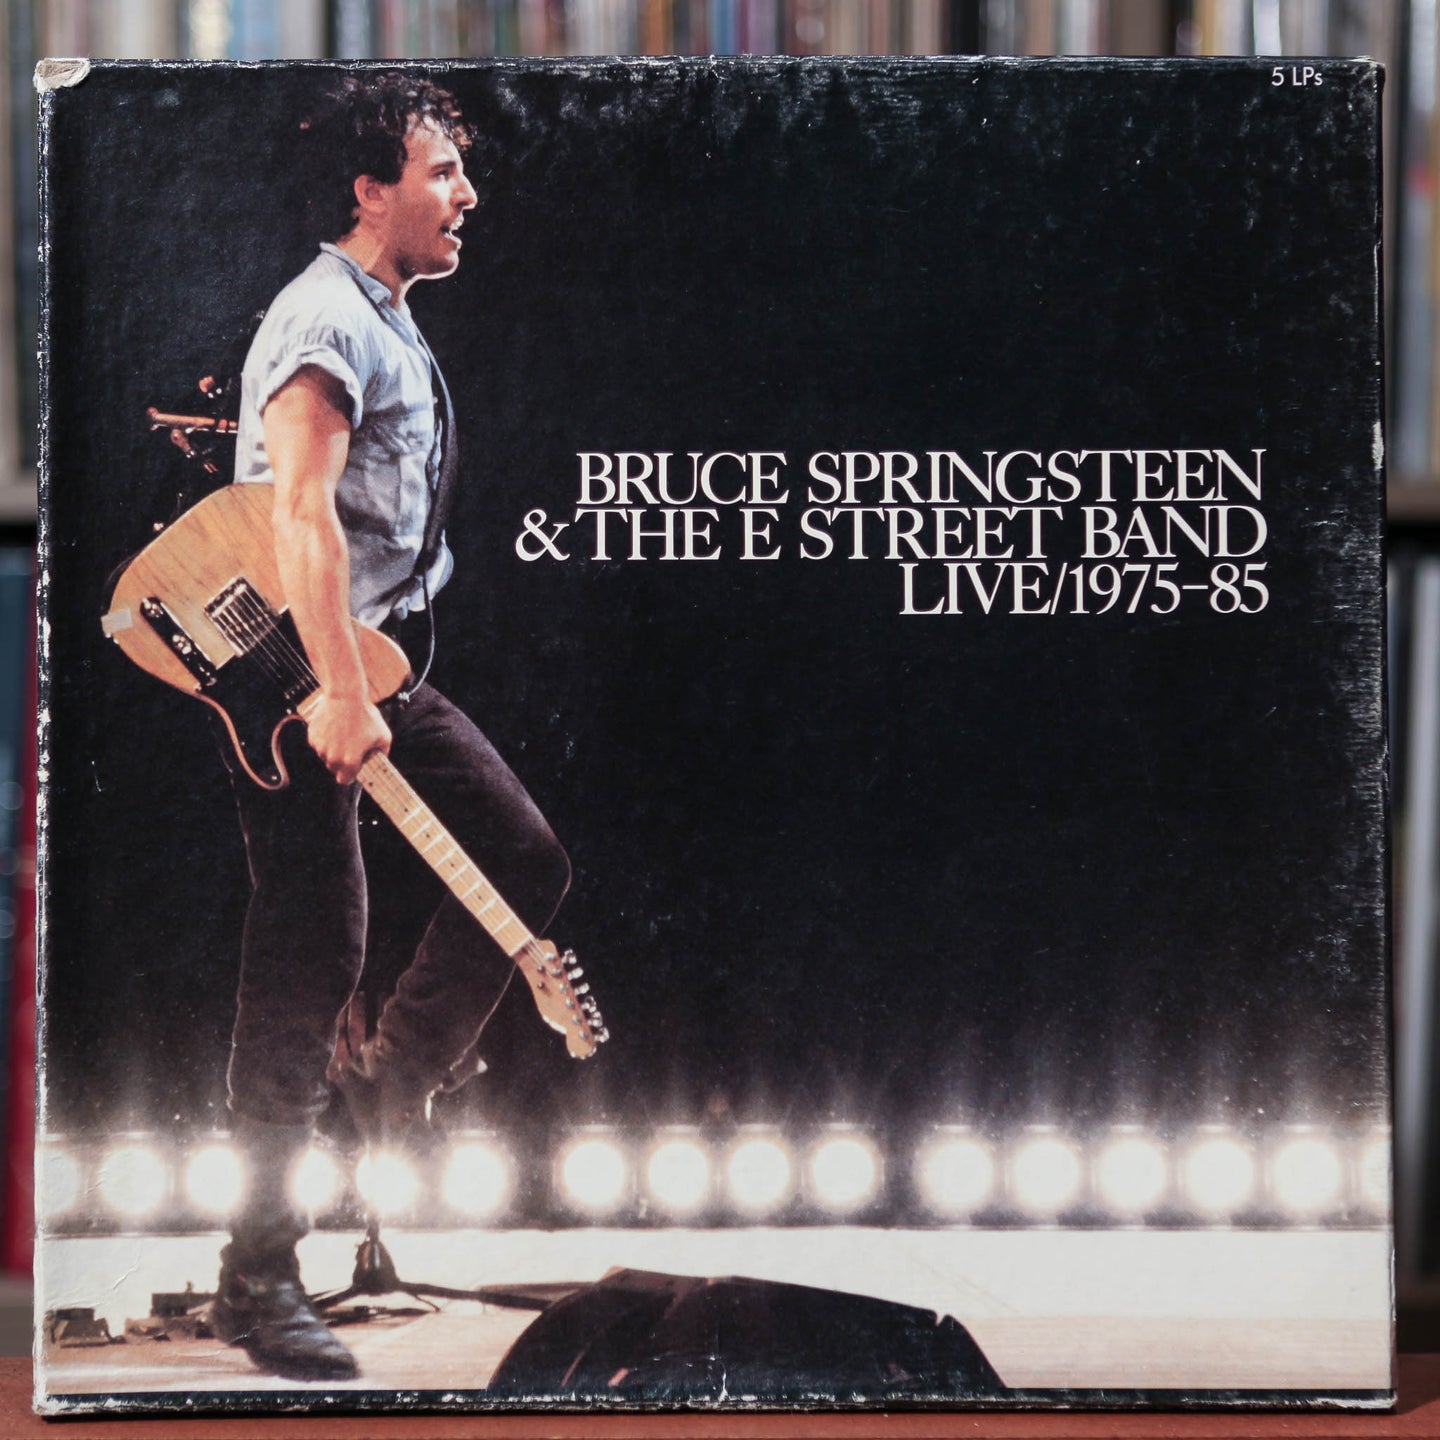 Bruce Springsteen & The E Street Band - 5LP LIVE/1975-85 - 1986 Columbia, VG/EX